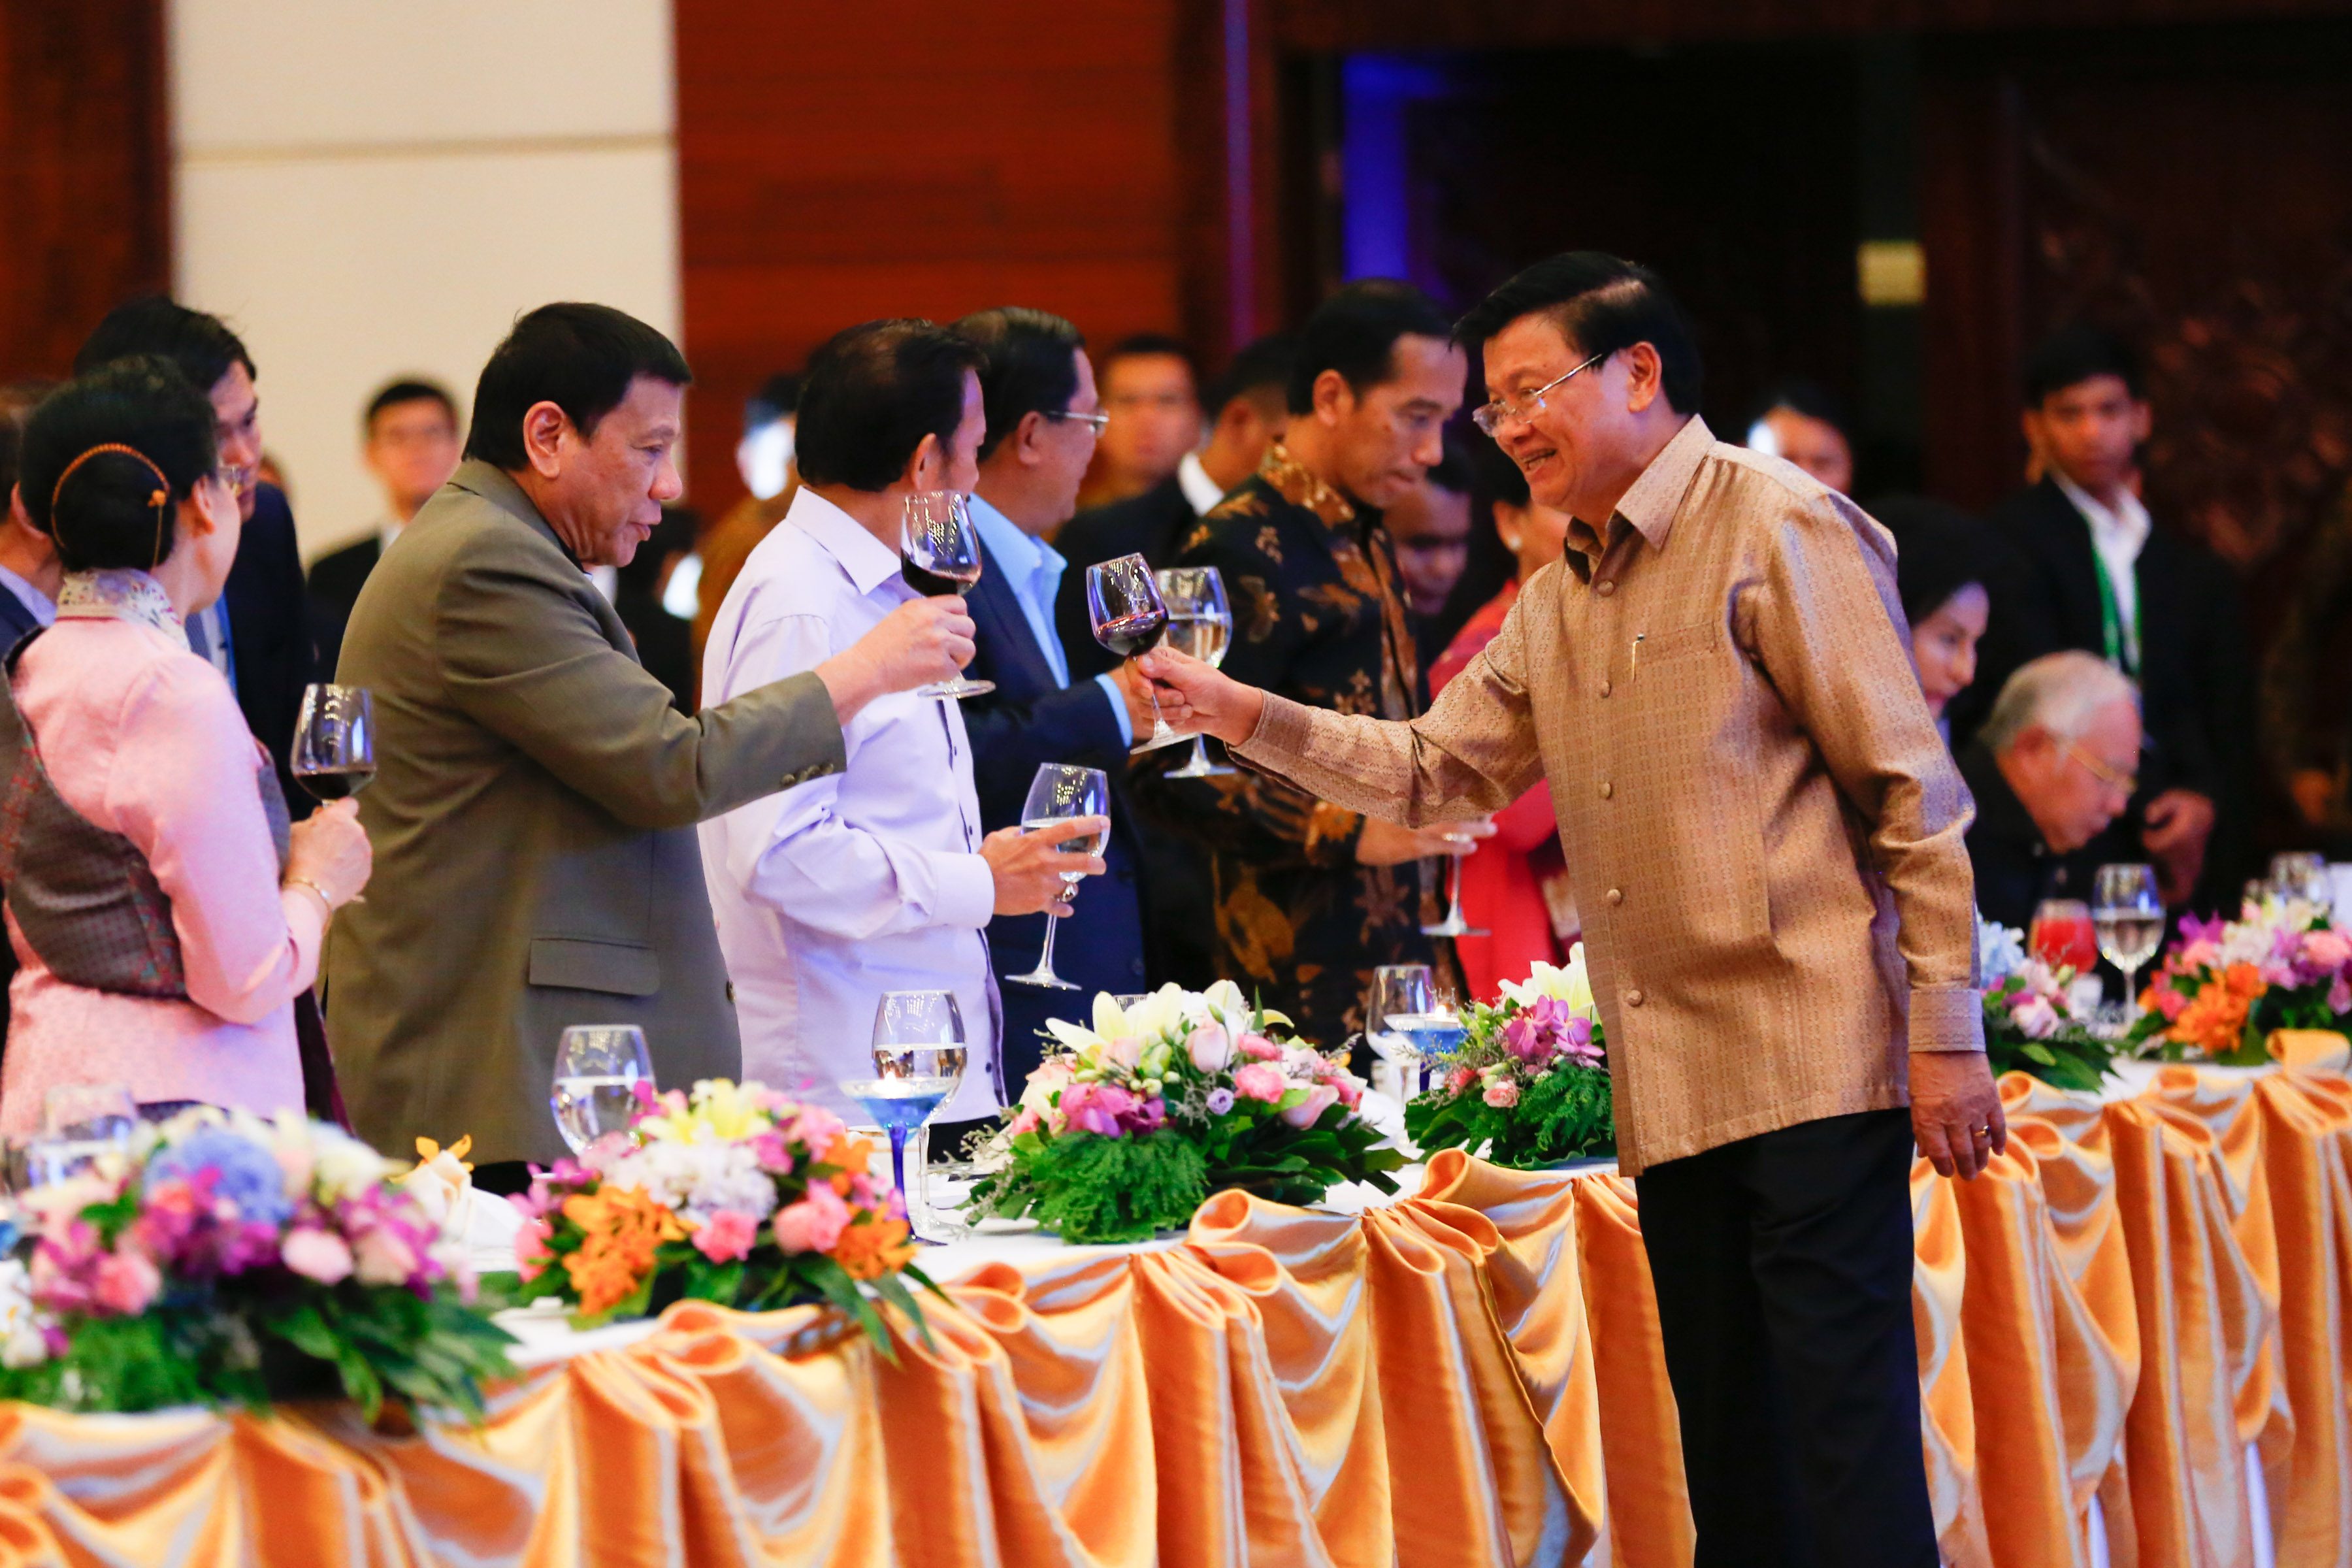 TOAST TO SUCCESS. President Duterte accepts a toast from Laotian Prime Minister Thongloun Sisoulith during a welcome dinner at Don Chan Palace Hotel in Vientiane, Laos on September 6 